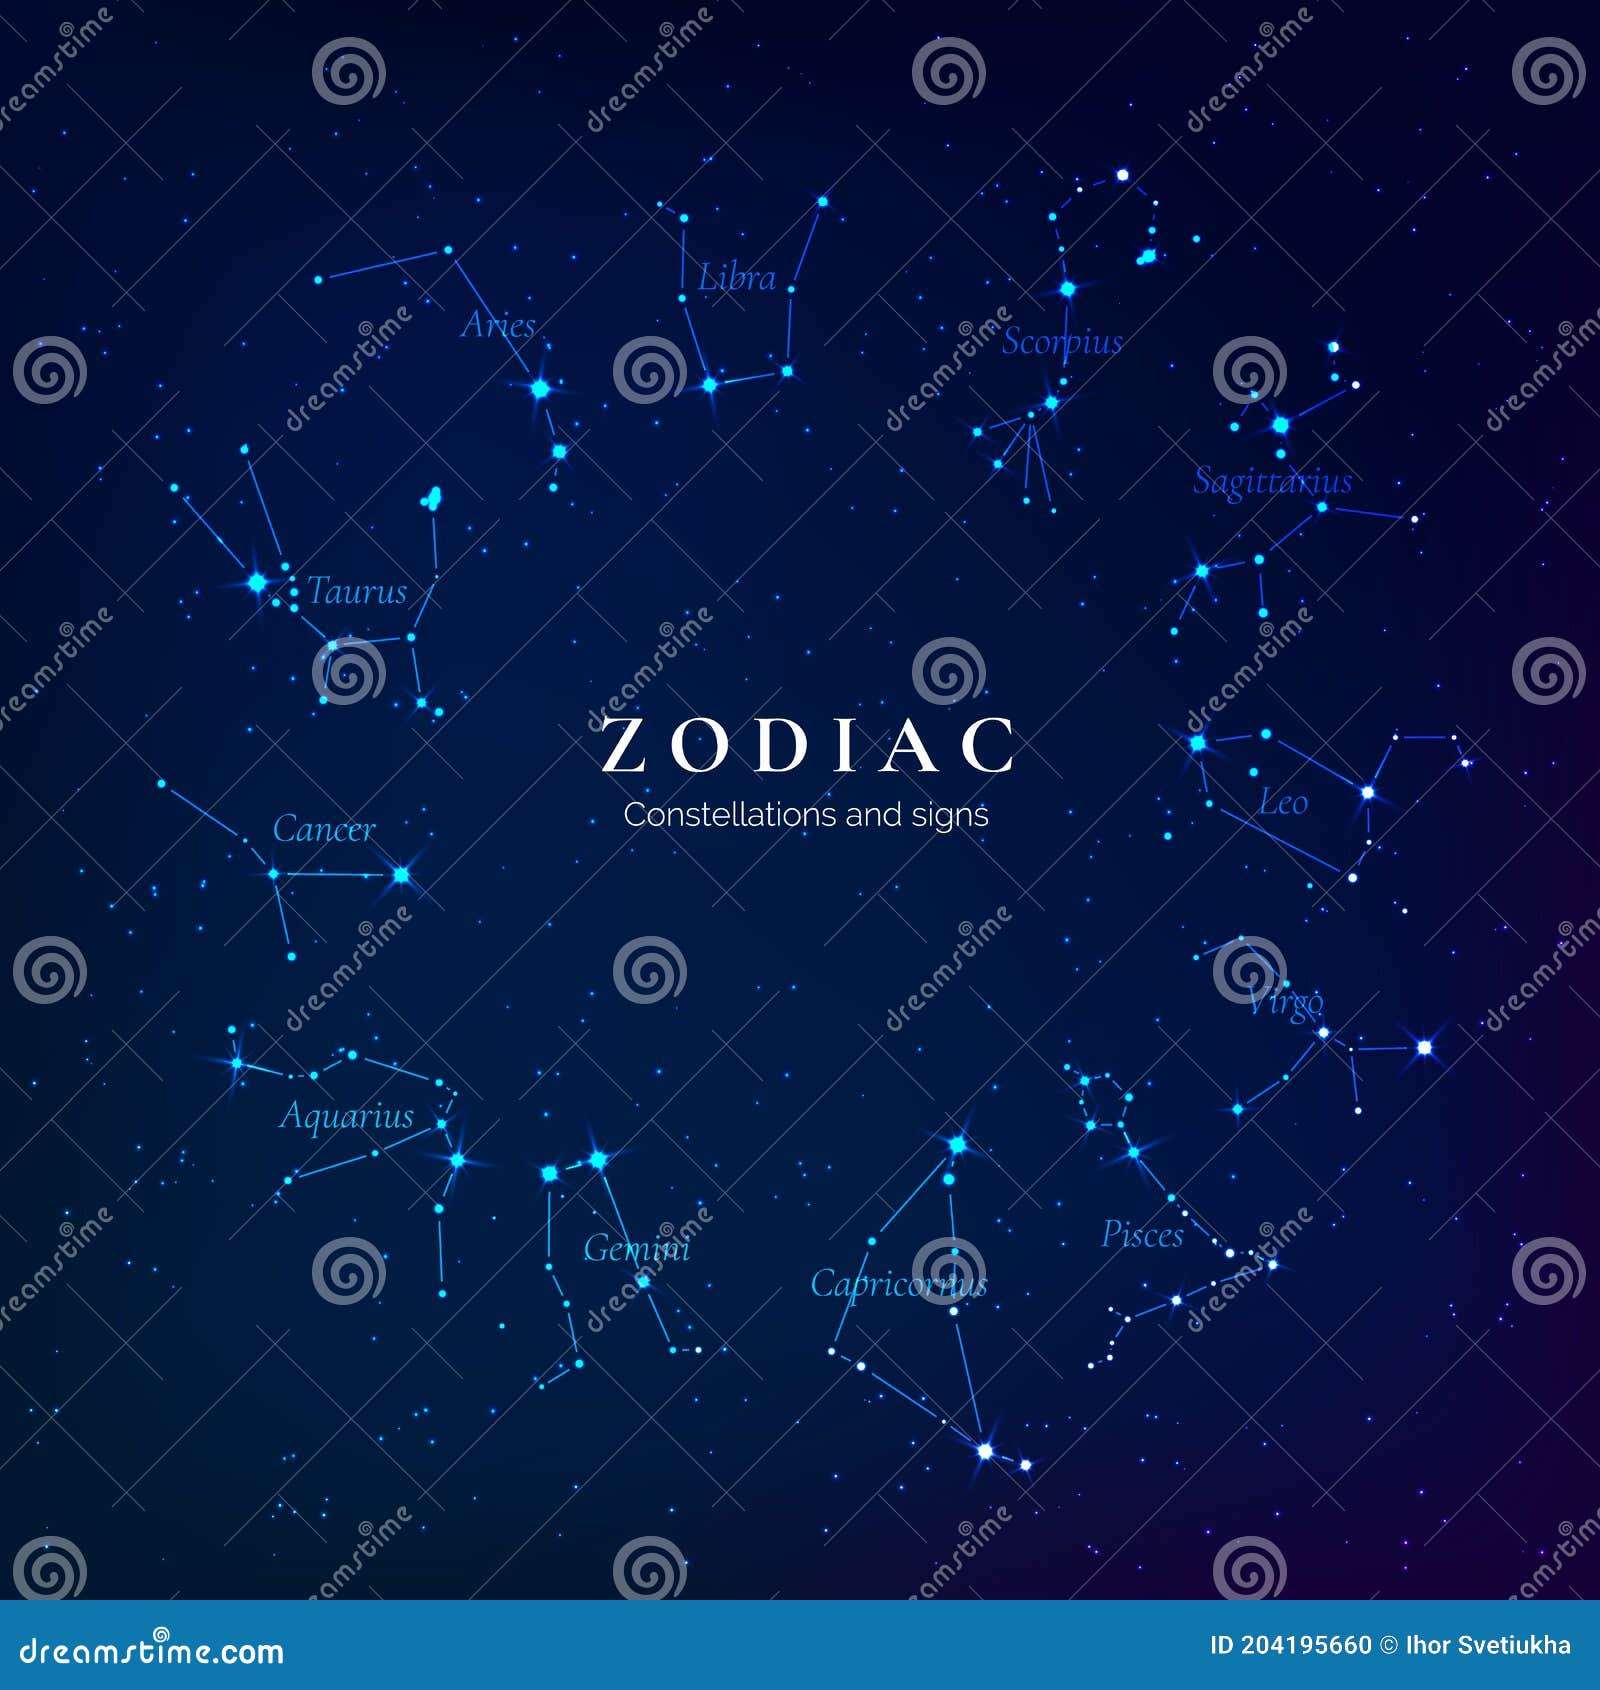 zodiac signs on starry sky. twelve constellations of the zodiac. constellations lying in the plane of the ecliptic. 